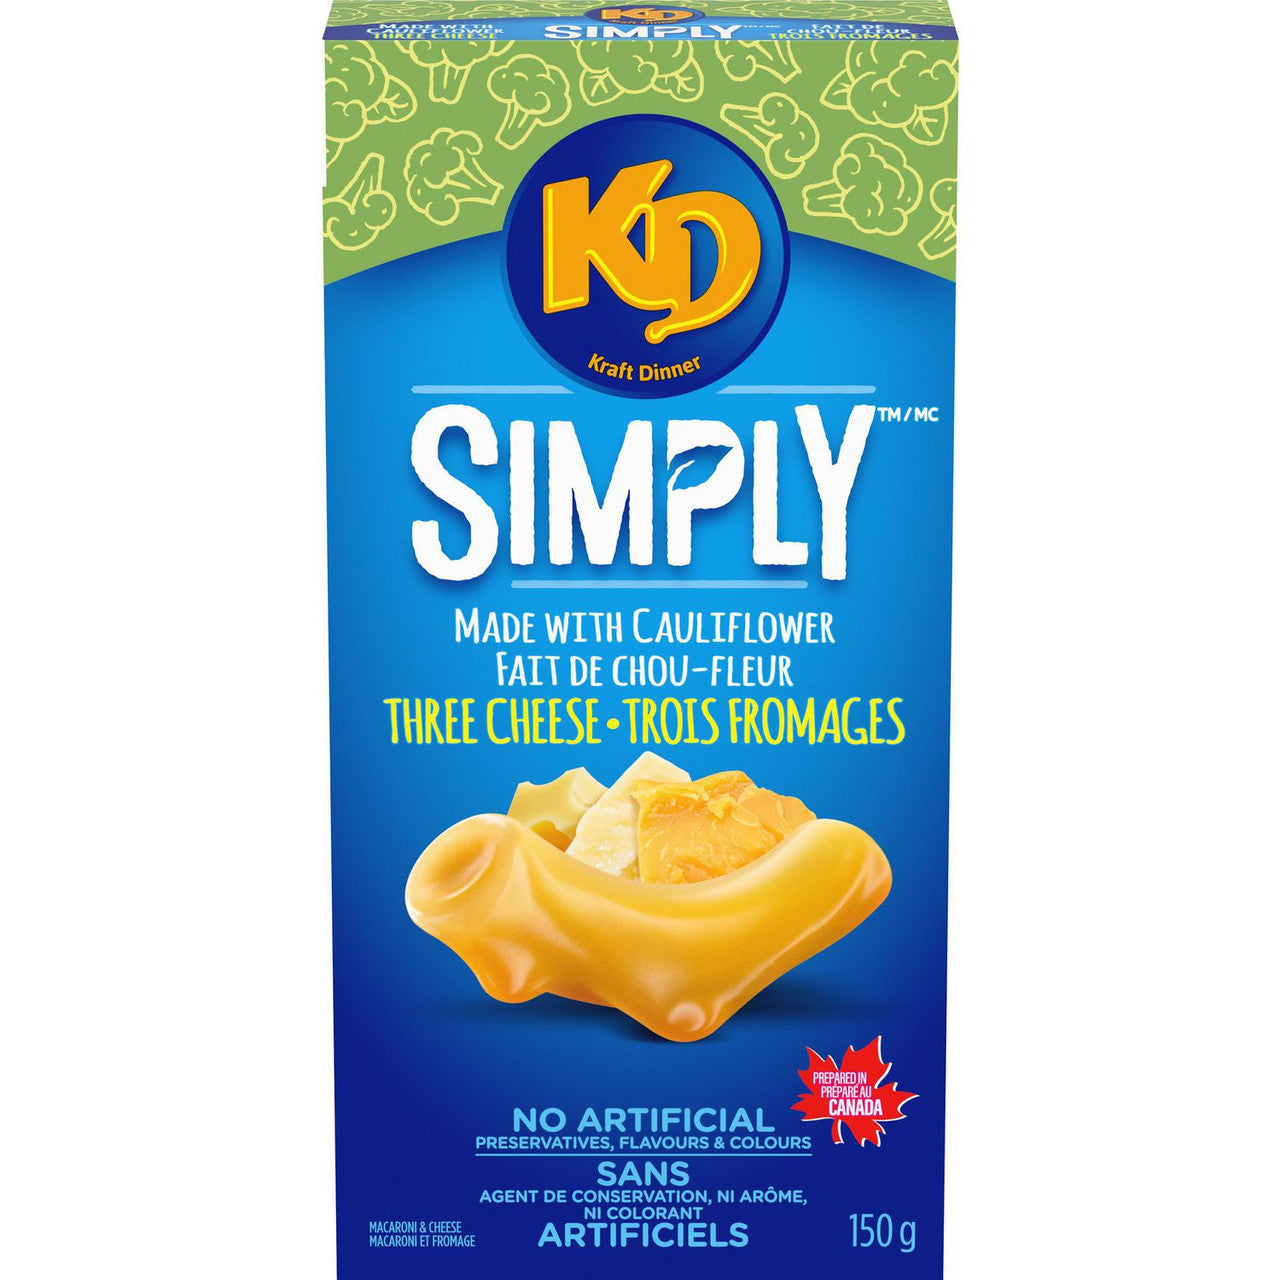 Kraft Dinner Simply Macaroni & Cheese, Three Cheese made with Cauliflower, 150g/5.3 oz., {Imported from Canada}